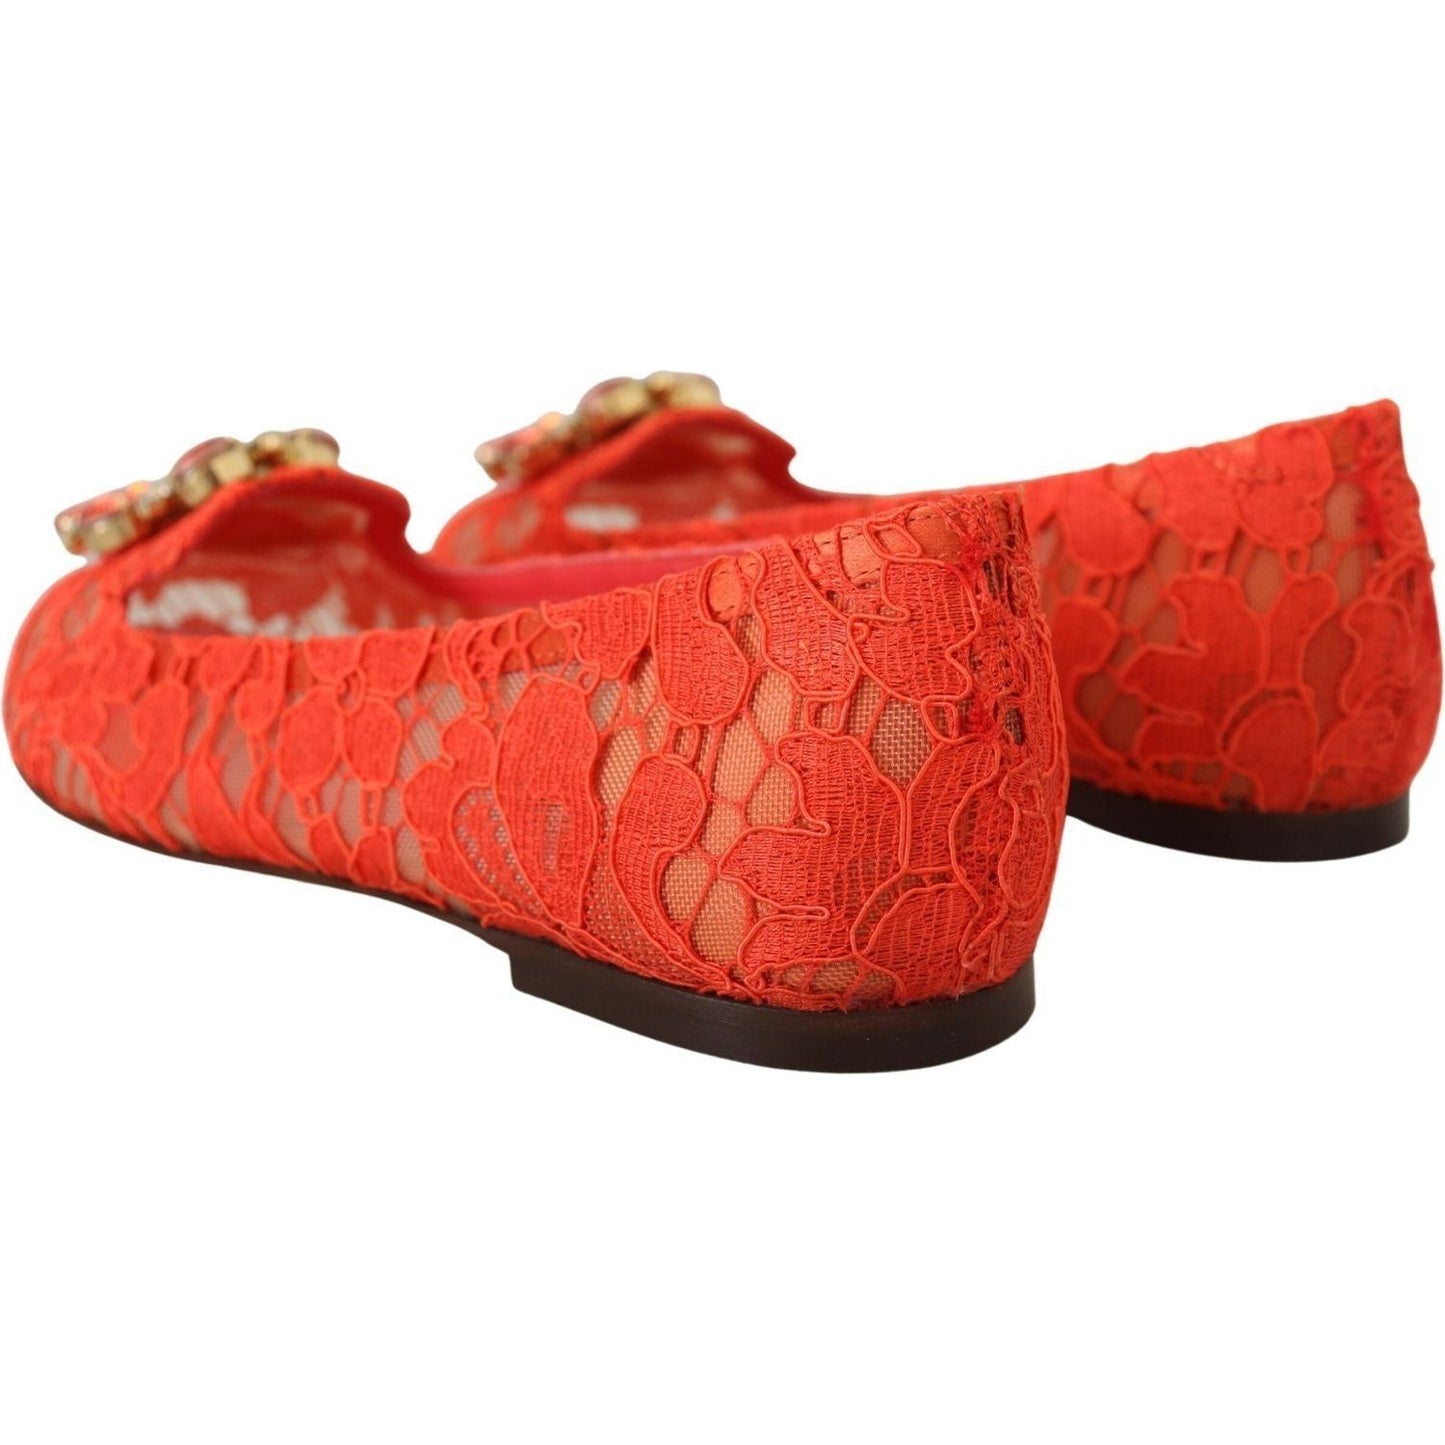 Dolce & Gabbana Elegant Lace Vally Flats in Coral Red red-taormina-lace-crystals-ballet-flats-shoes IMG_4967-scaled-0a0cb8db-7ec.jpg